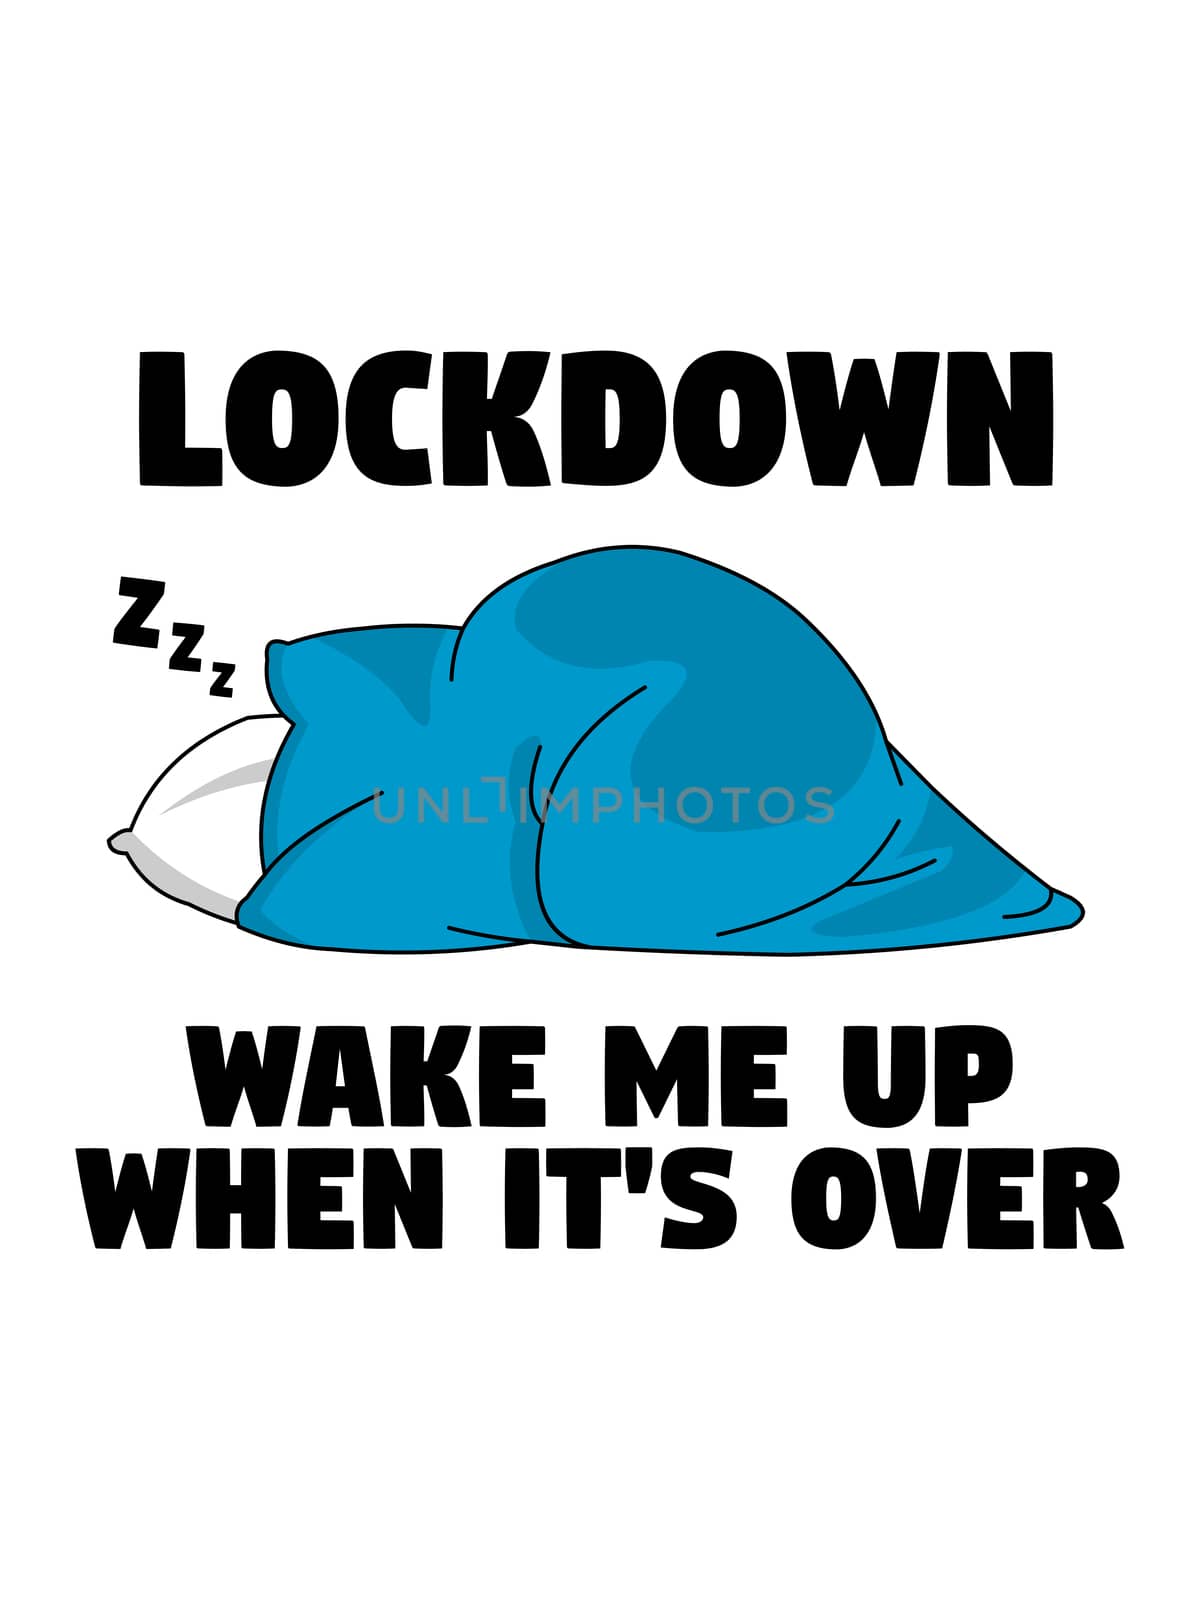 Lockdown wake me up when it's over by Bigalbaloo